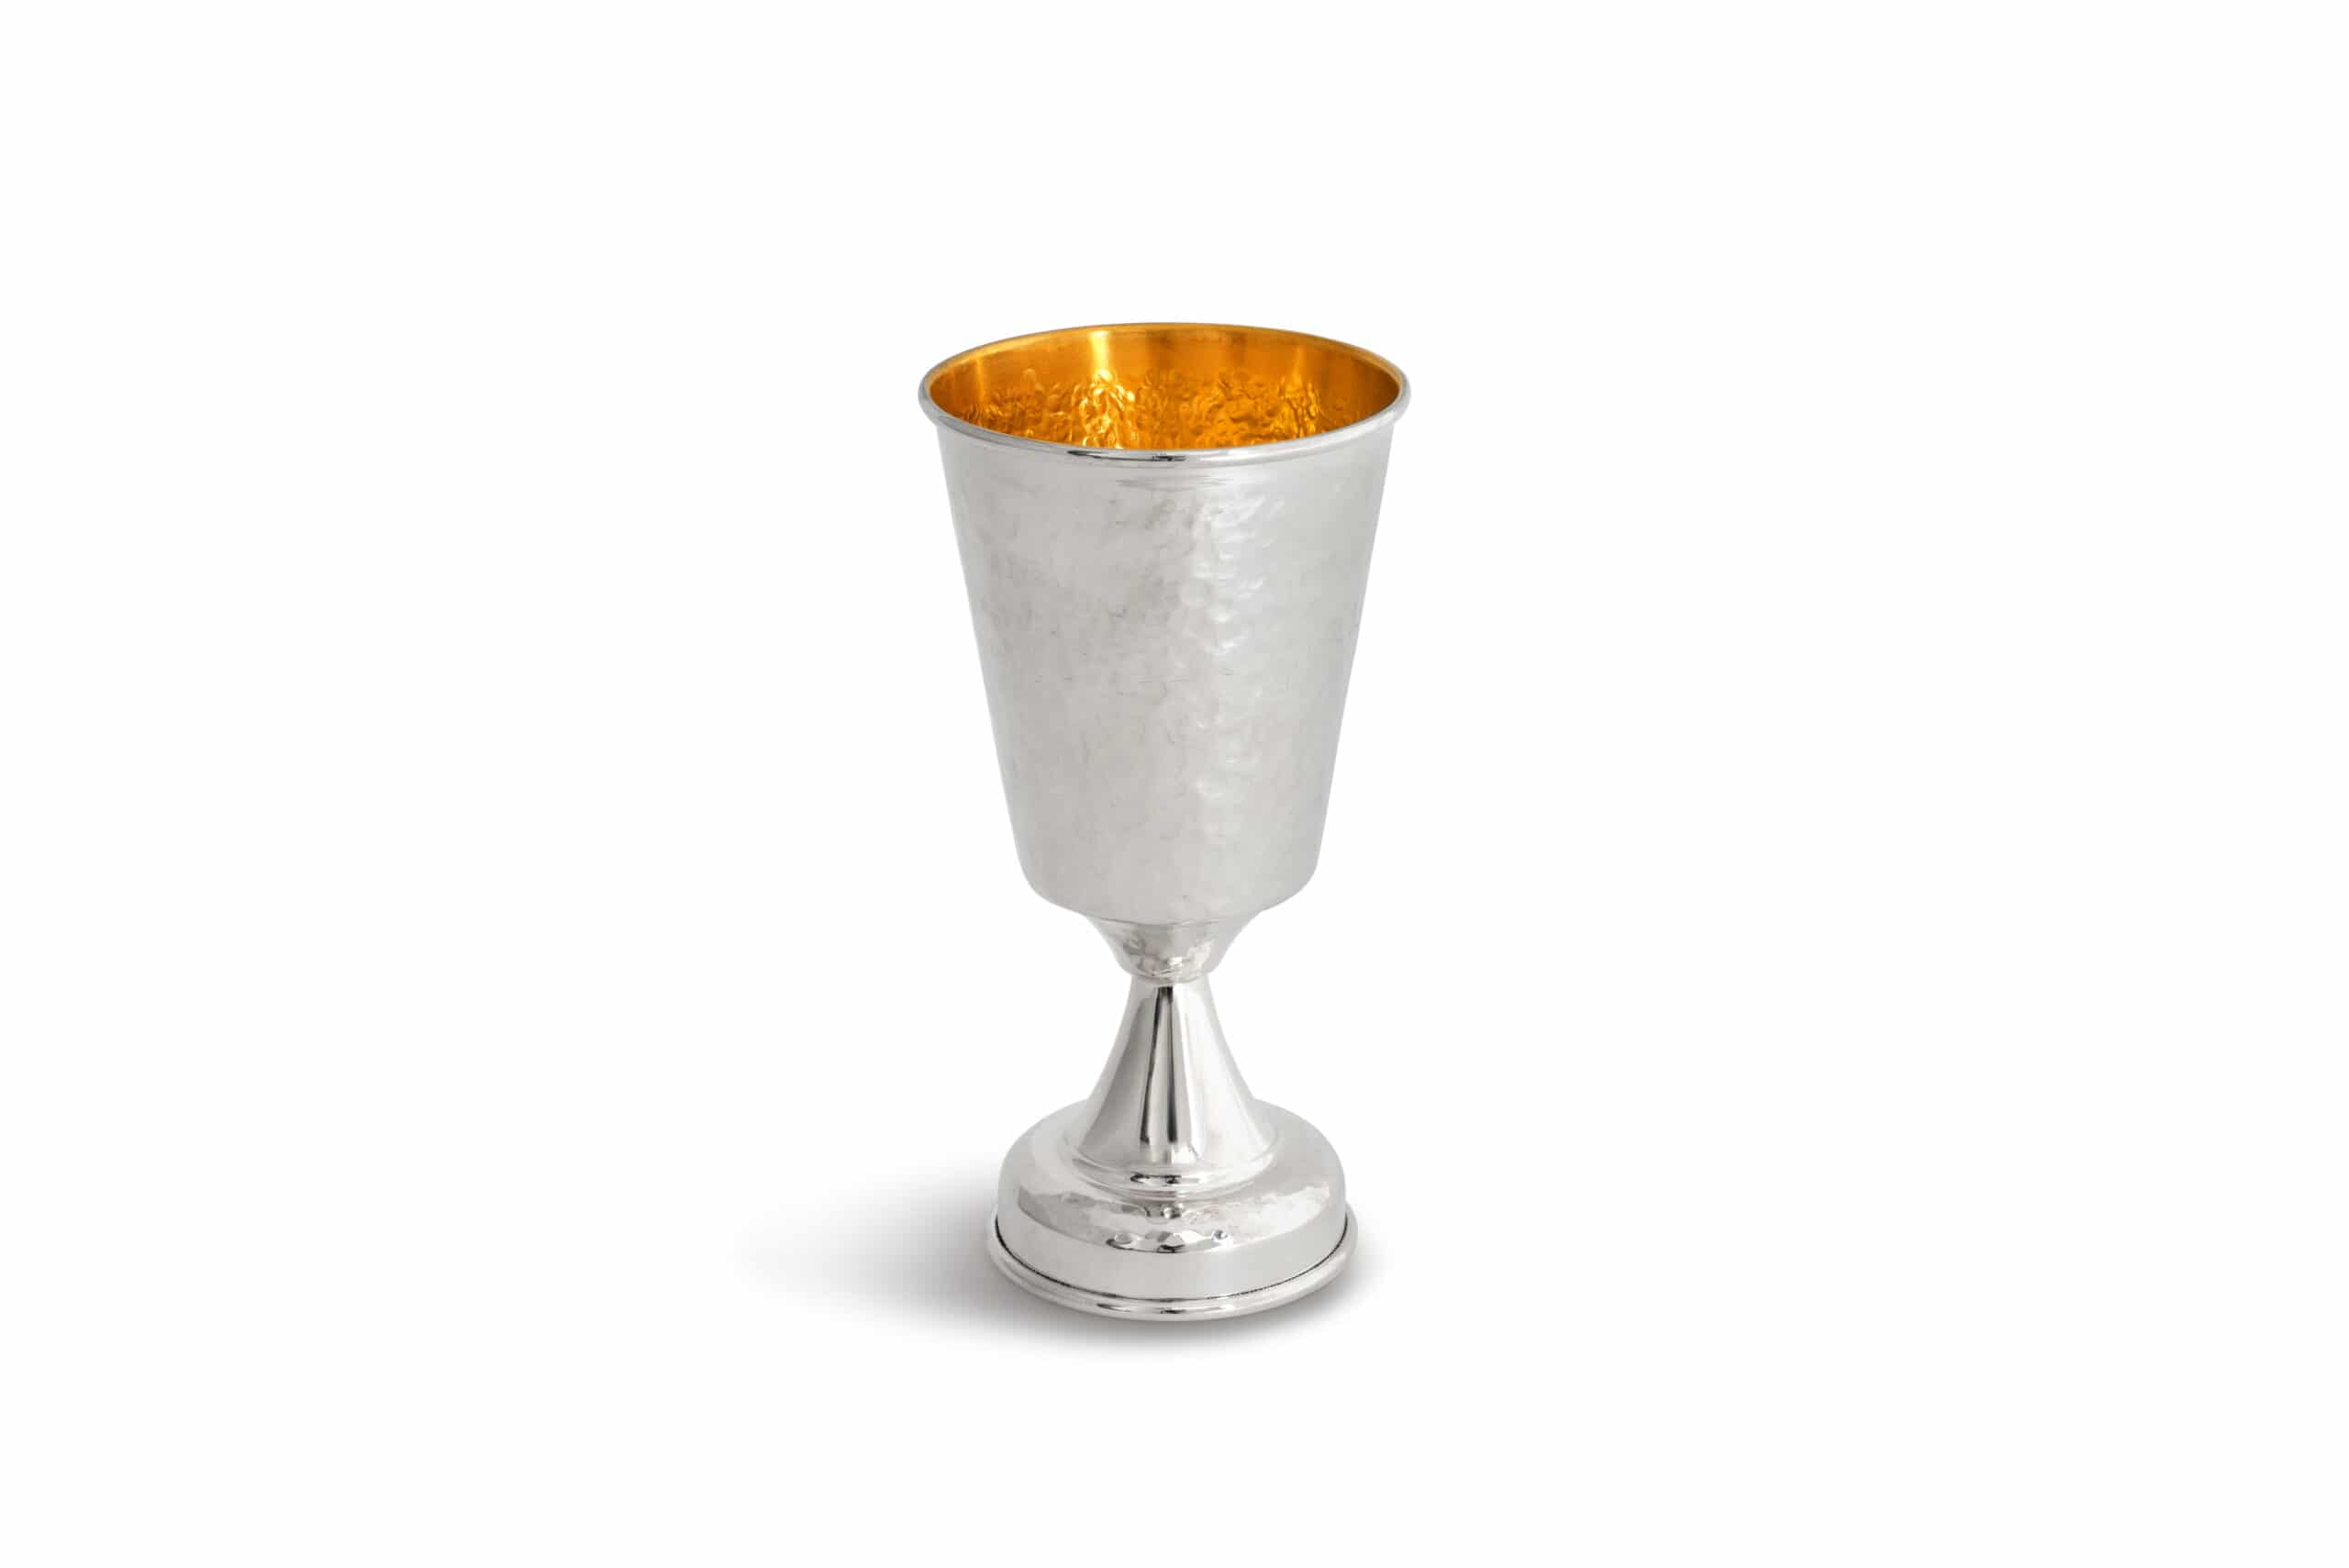 Elegant Personalized 925 Sterling Silver Wine Cup